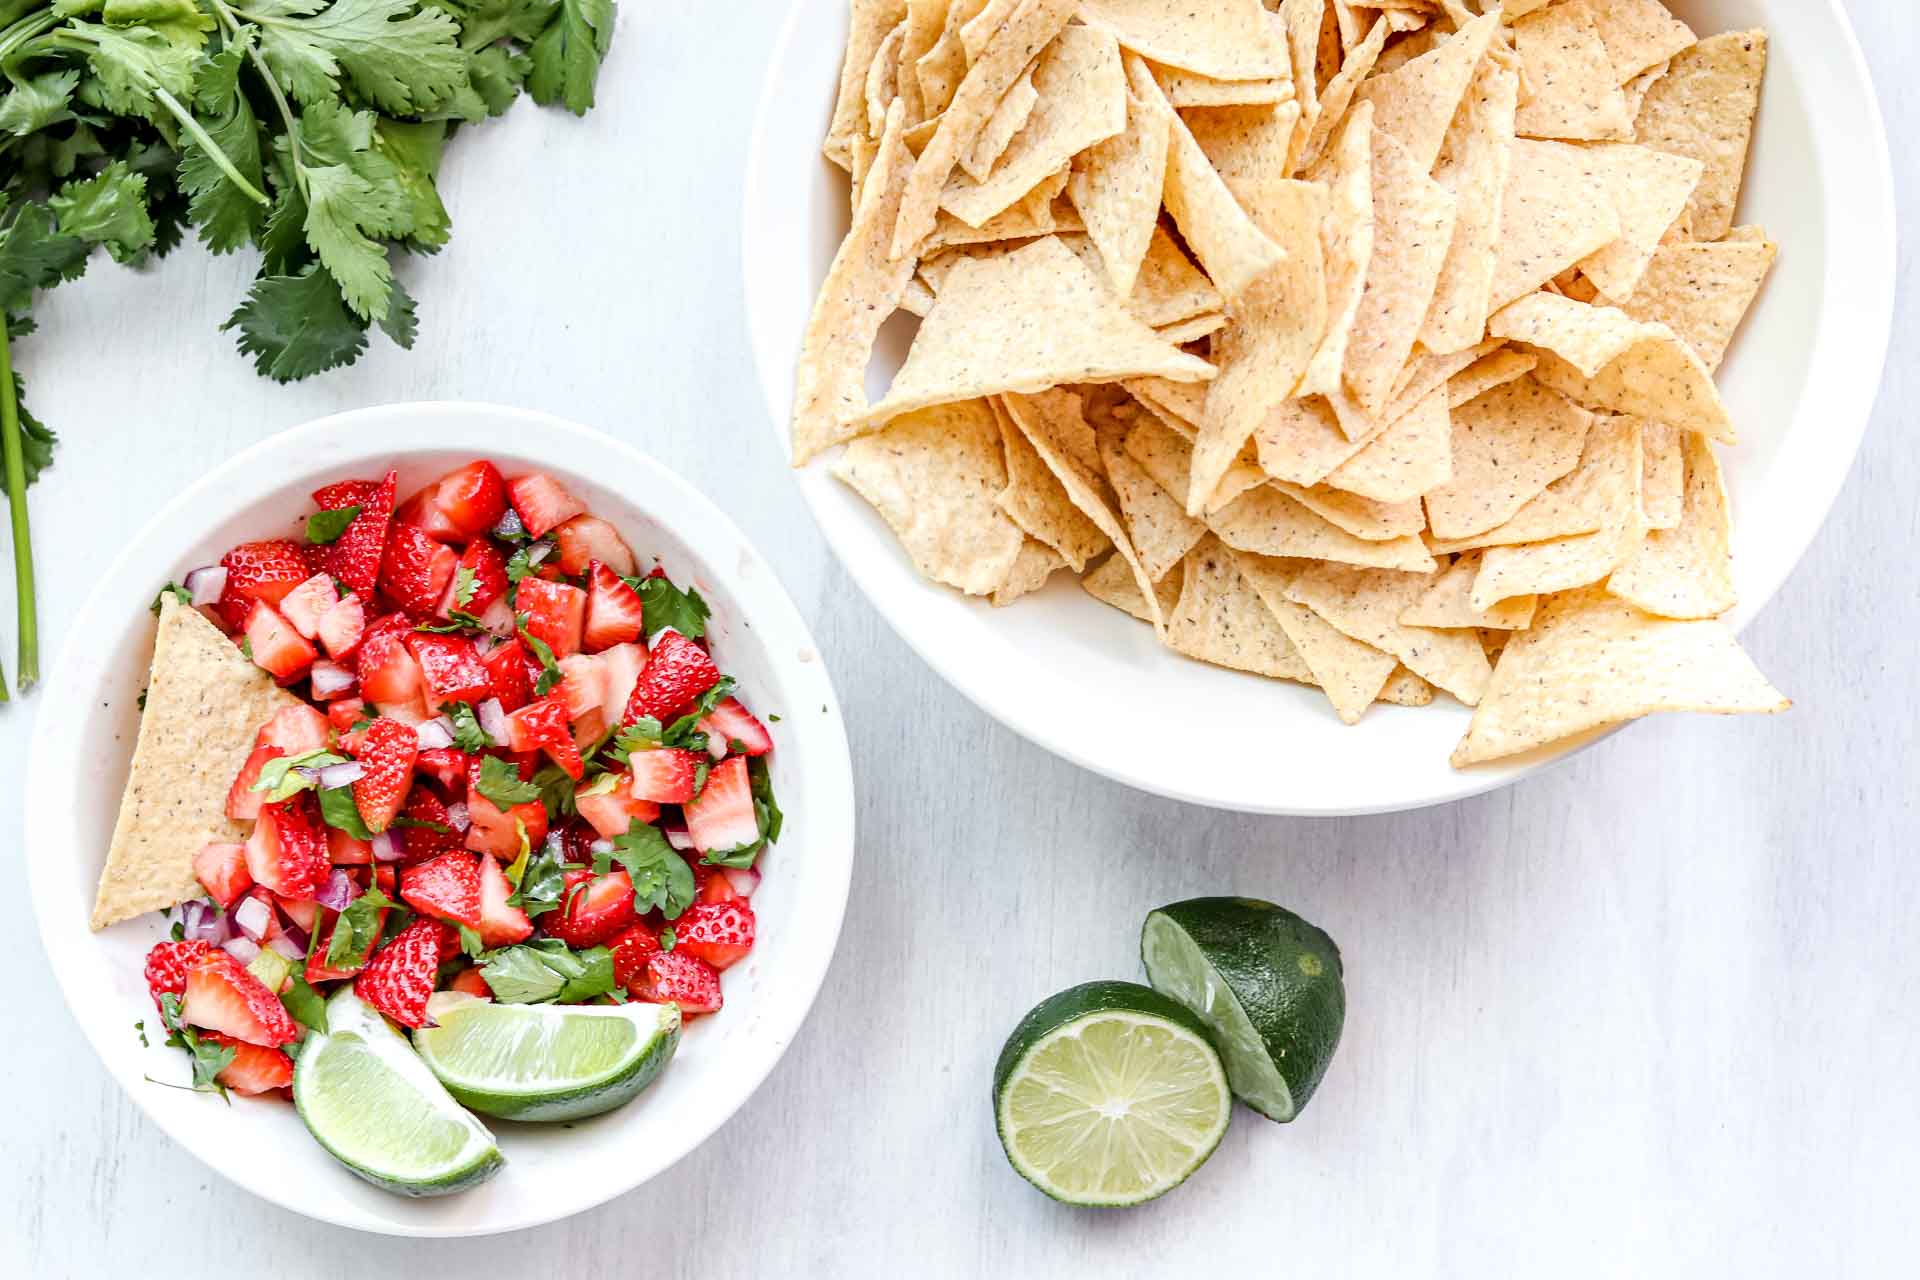 image is a bowl of Strawberry salsa with 2 lime wedges. www.atwistedplate.com/strawberry-salsa/